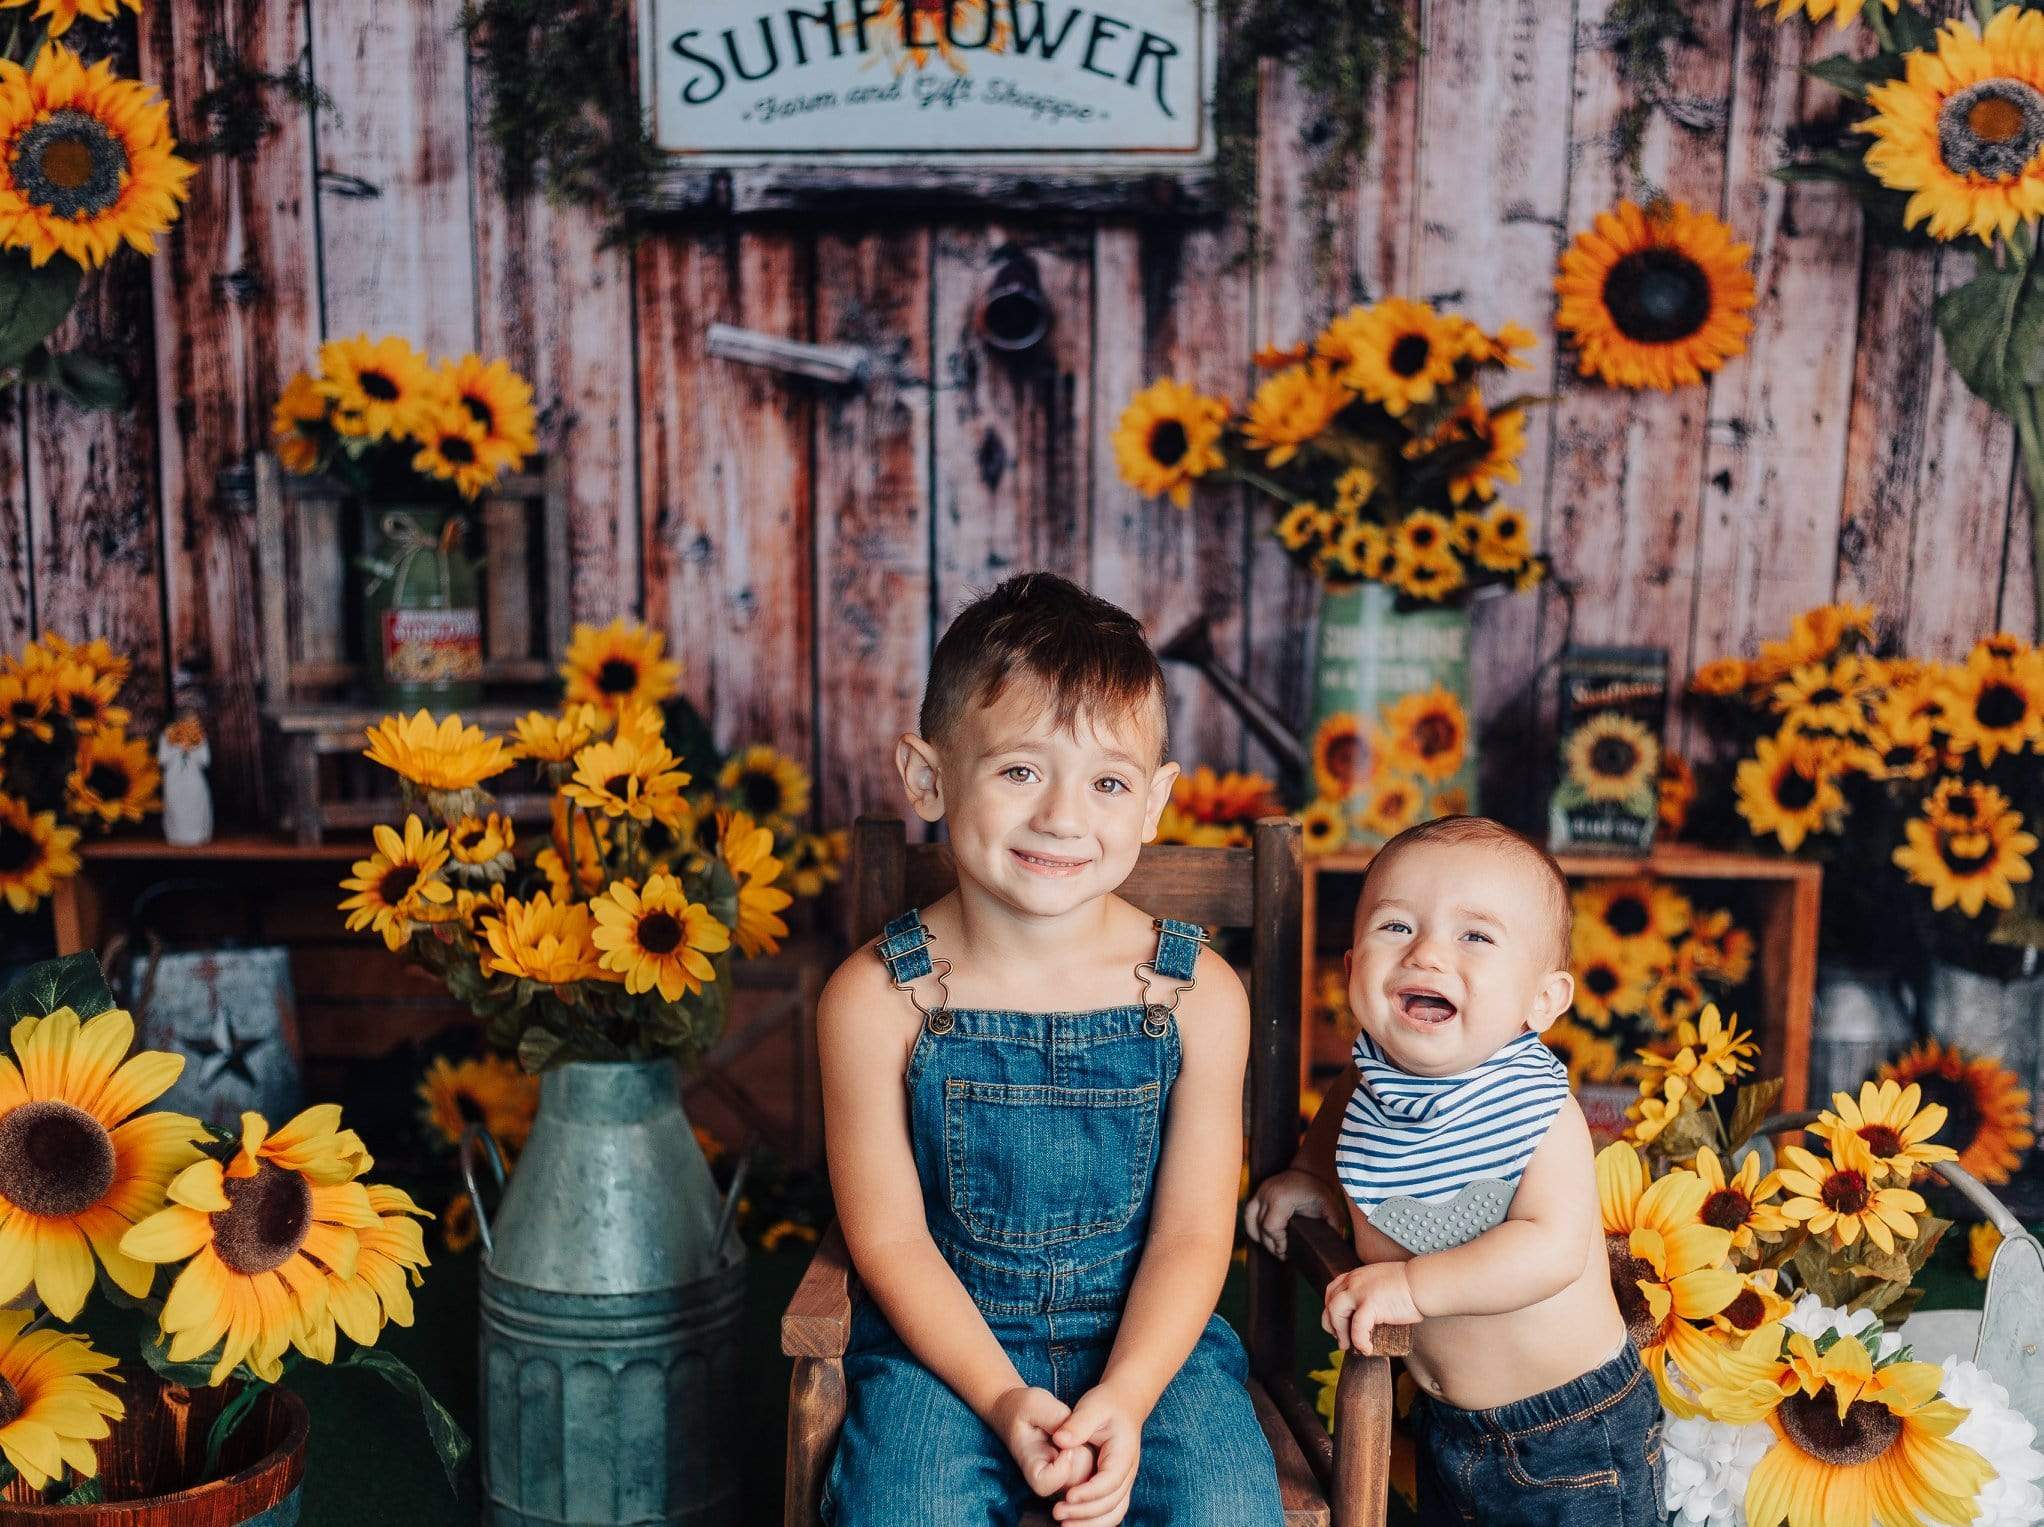 Kate Spring Sunflower Gift Shop Wood Fall Backdrop